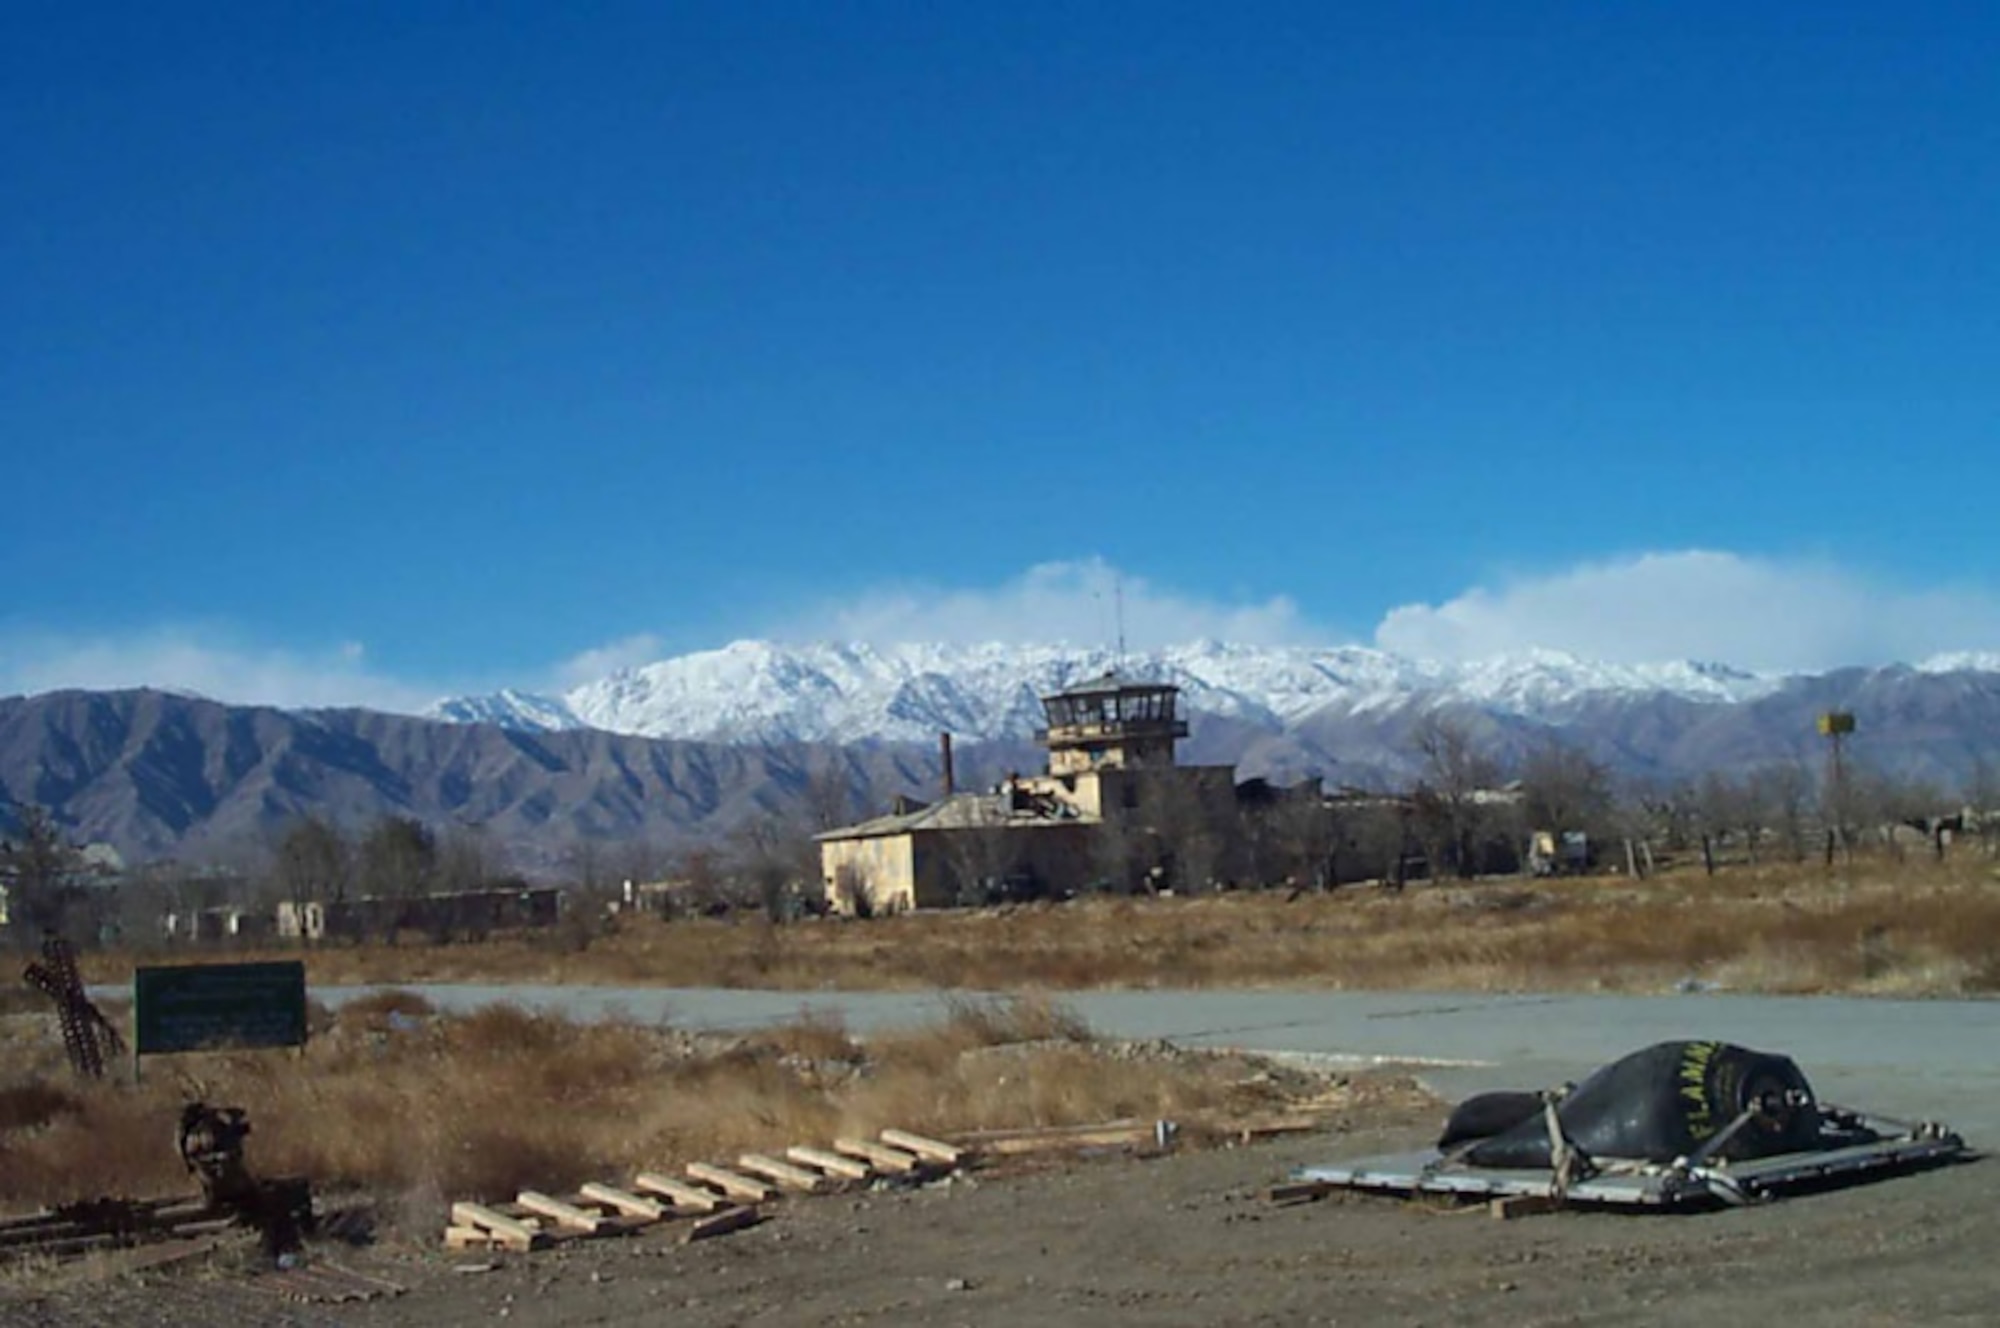 The old Russian control tower as it appeared when the first U.S. forces arrived on Bagram Airfield during late 2001. The tower, which is a familiar landmark to deployed service members and civilians who have worked here, was built on Bagram Airfield in 1976 during the Soviet Union's economic collaboration with Afghanistan. (Courtesy photo)